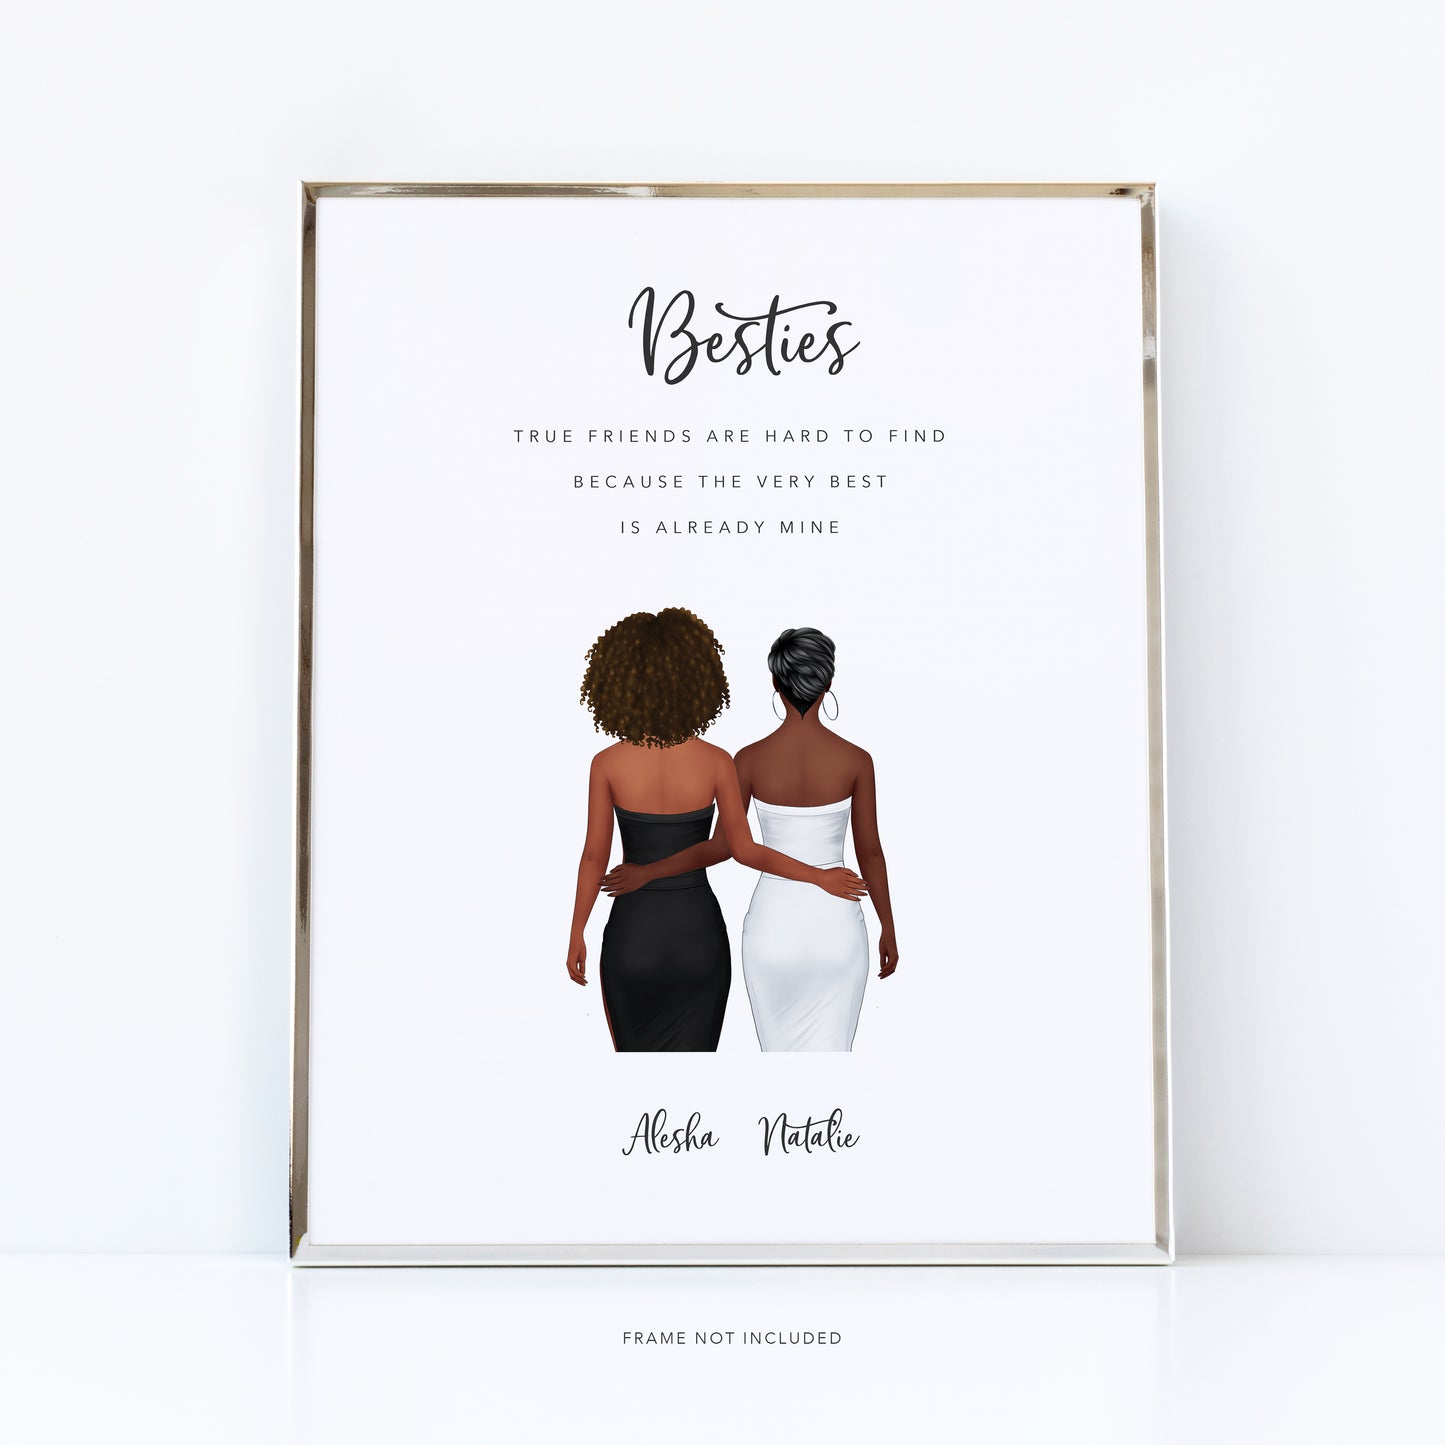 Besties print with a special birthday message to a friend